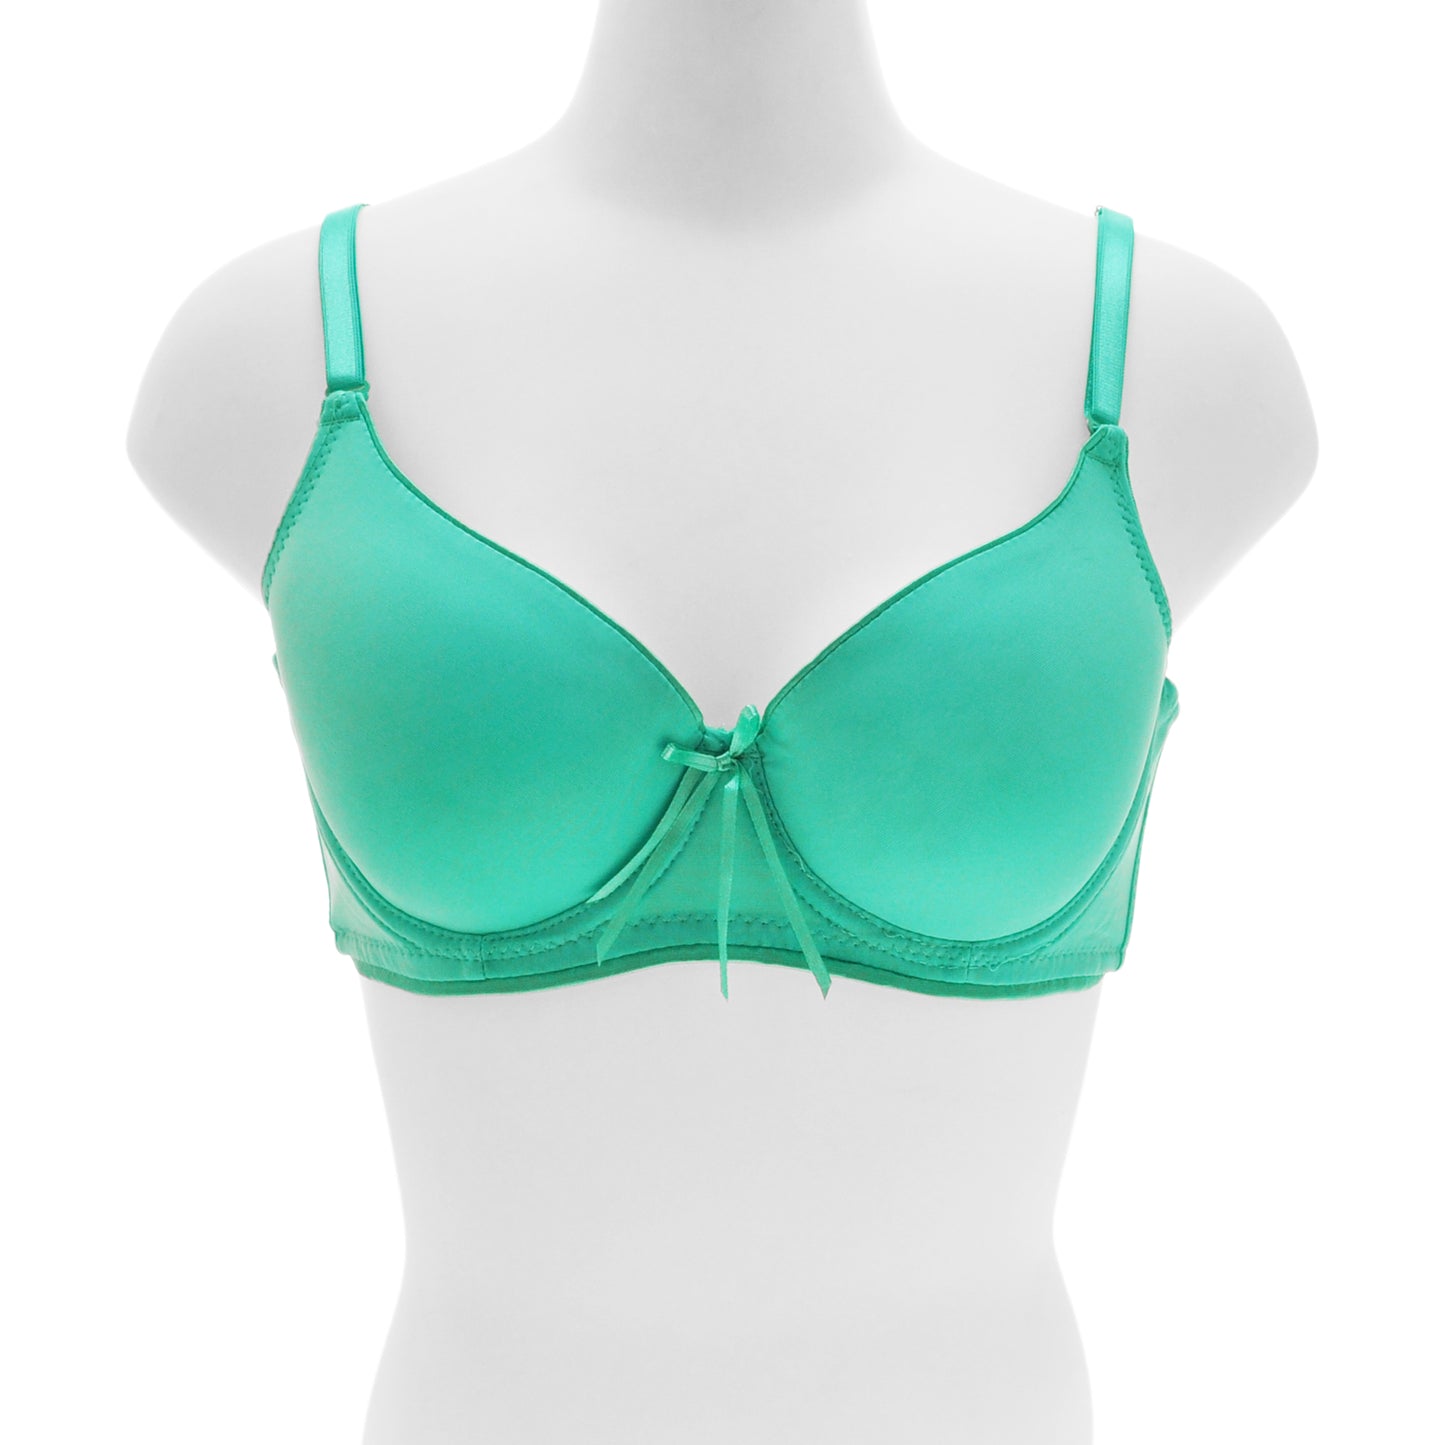 Wired A Cup T-Shirt Bras with Adjustable Convertible Straps (6-Pack)